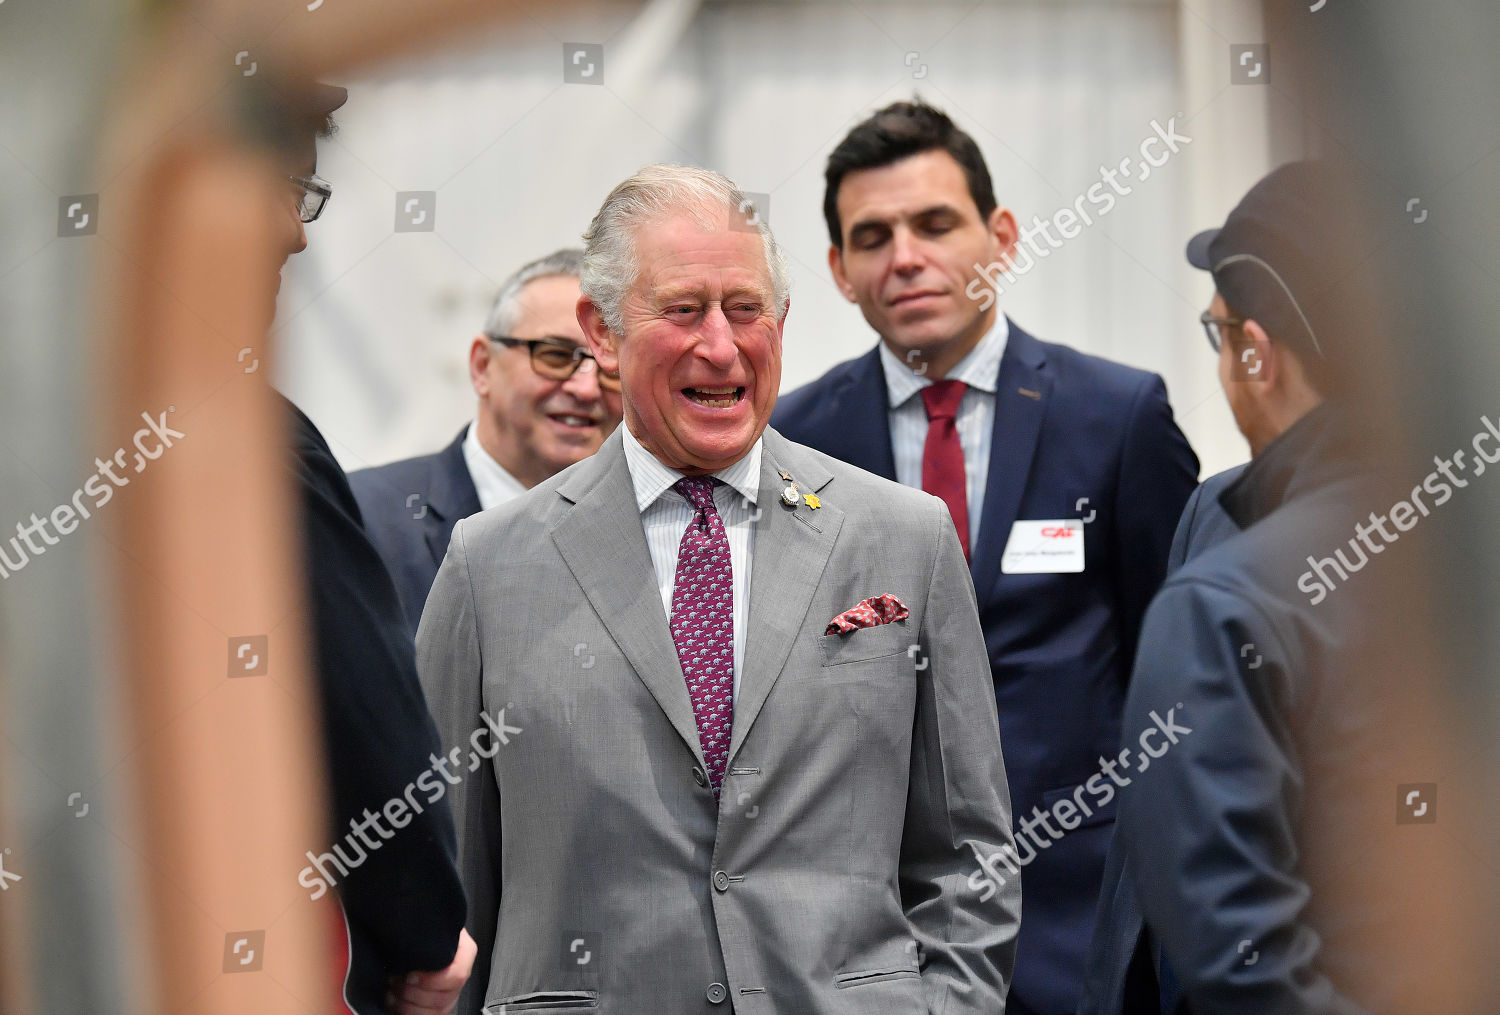 prince-charles-visit-to-south-wales-uk-shutterstock-editorial-10563131p.jpg